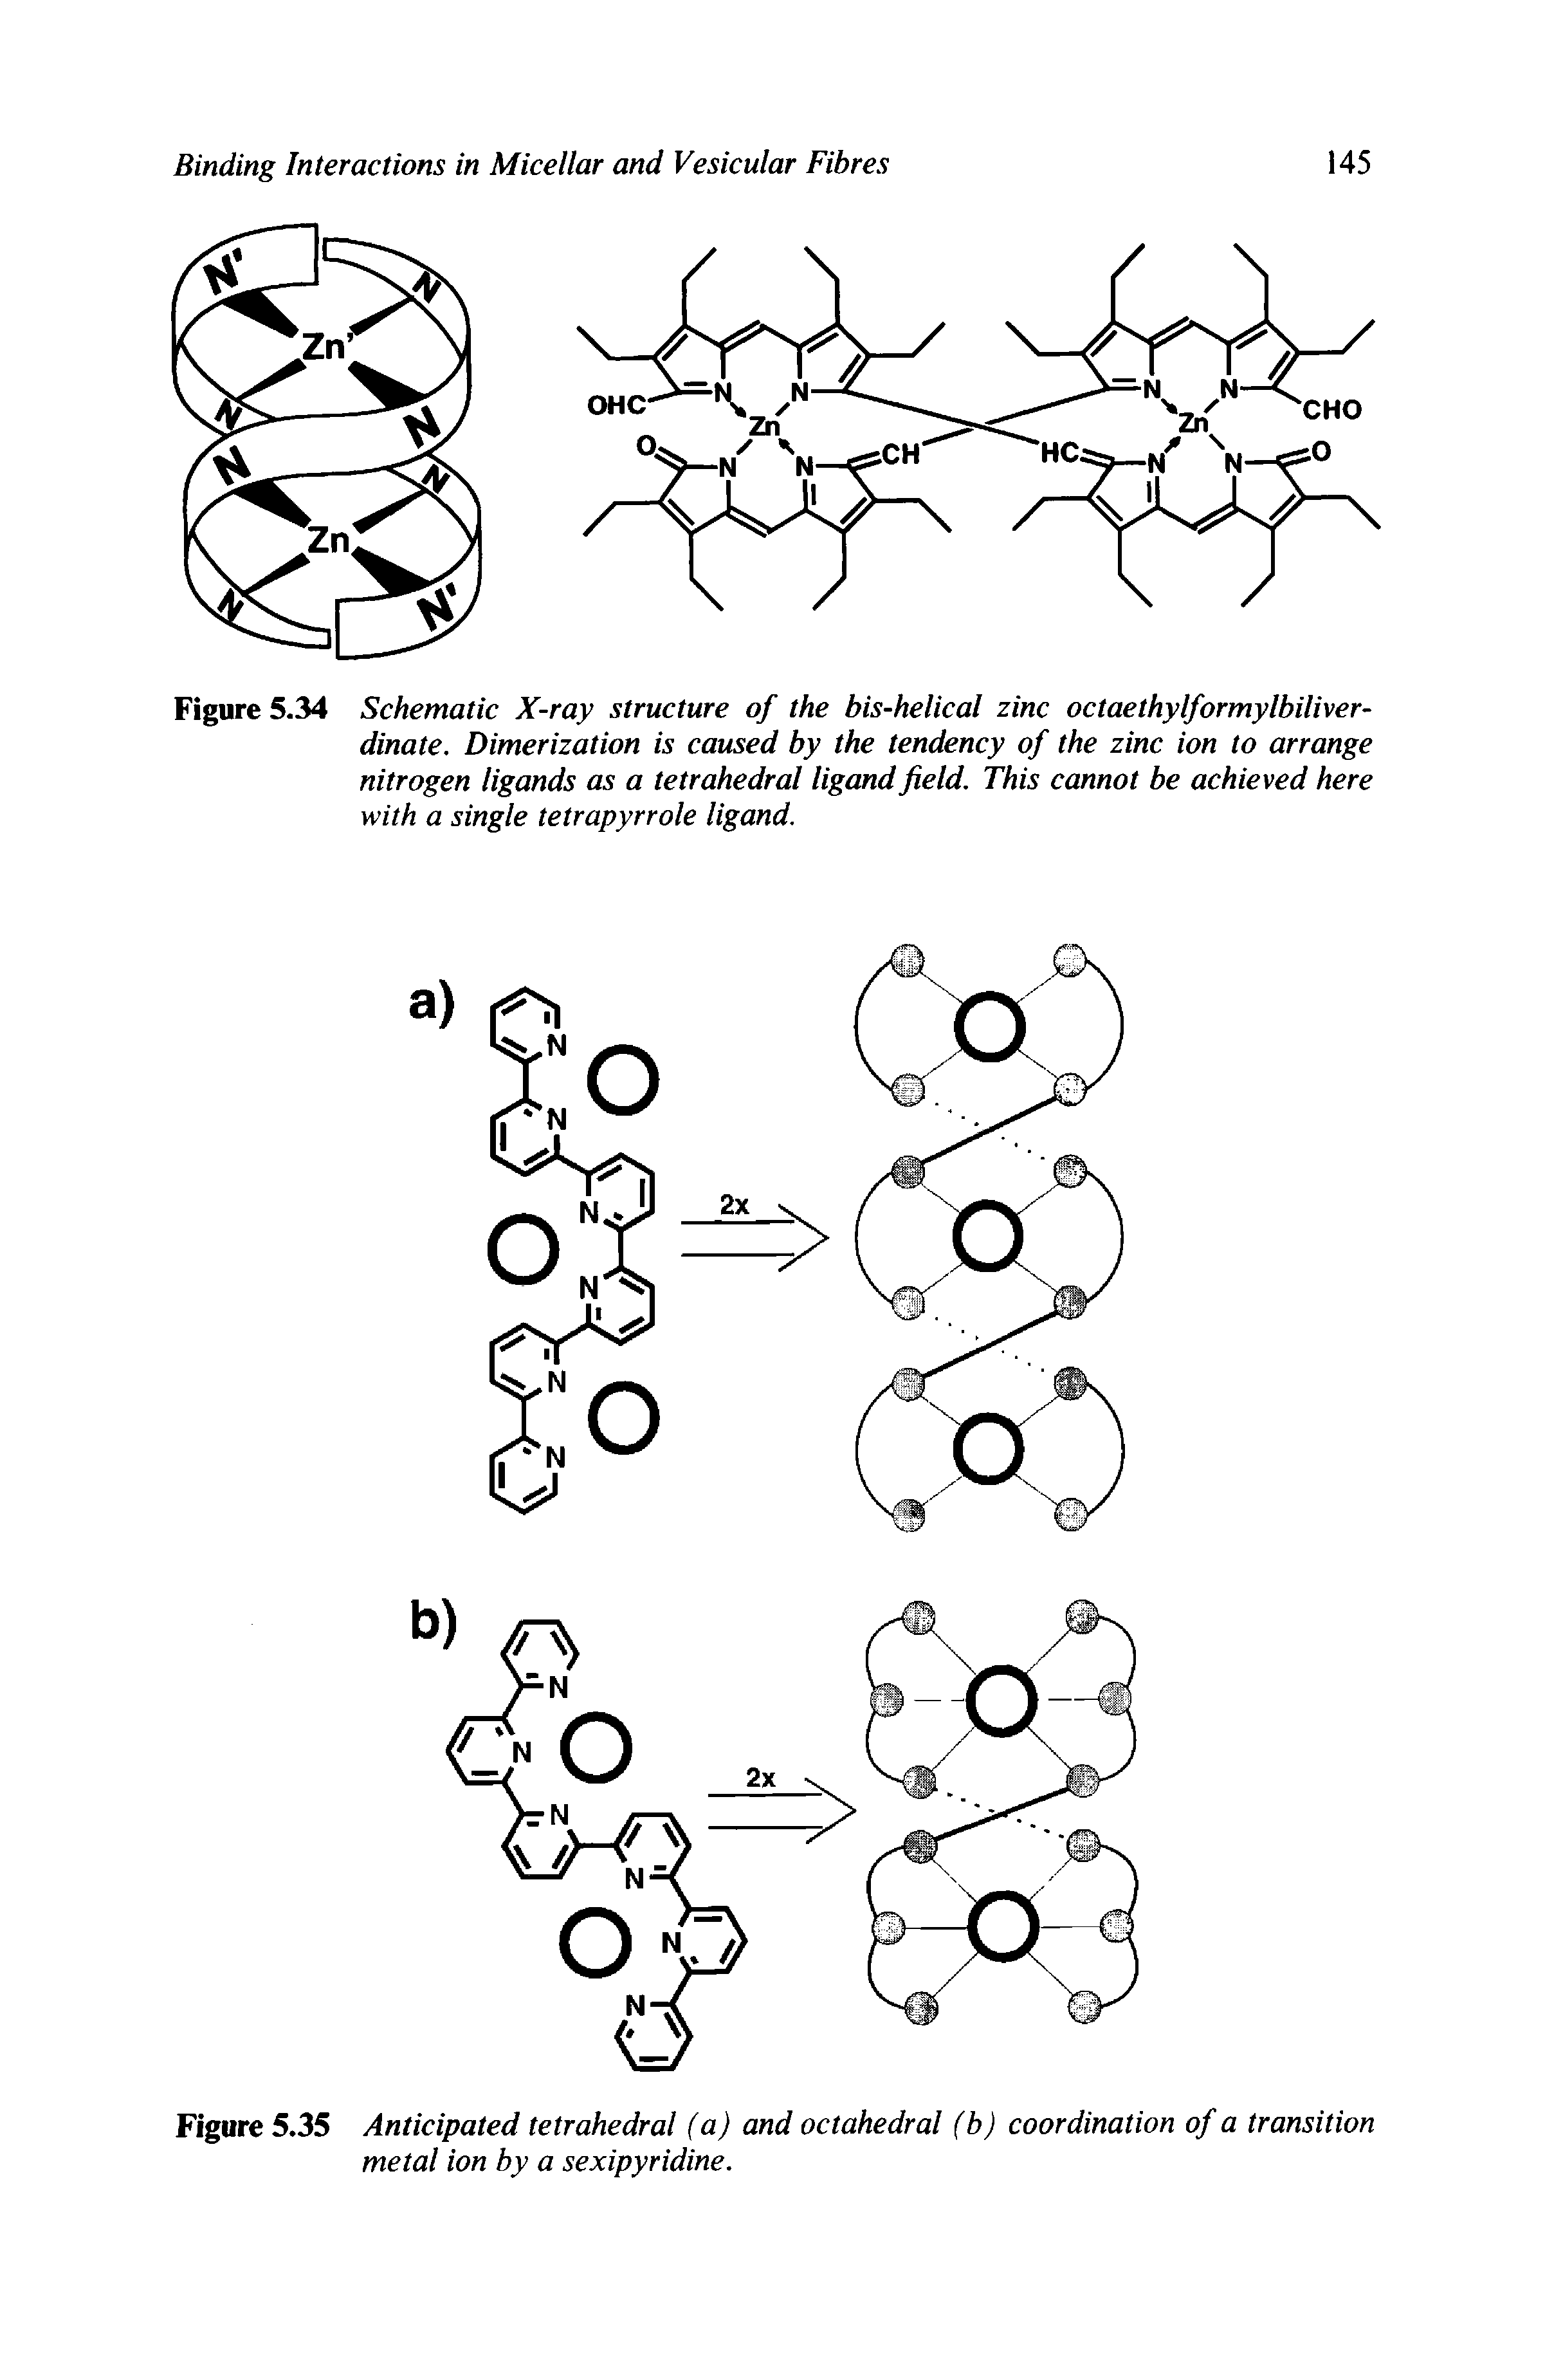 Figure 5.34 Schematic X-ray structure of the bis-helical zinc octaethylformylbiliver-dinate. Dimerization is caused by the tendency of the zinc ion to arrange nitrogen ligands as a tetrahedral ligand field. This cannot be achieved here with a single tetrapyrrole ligand.